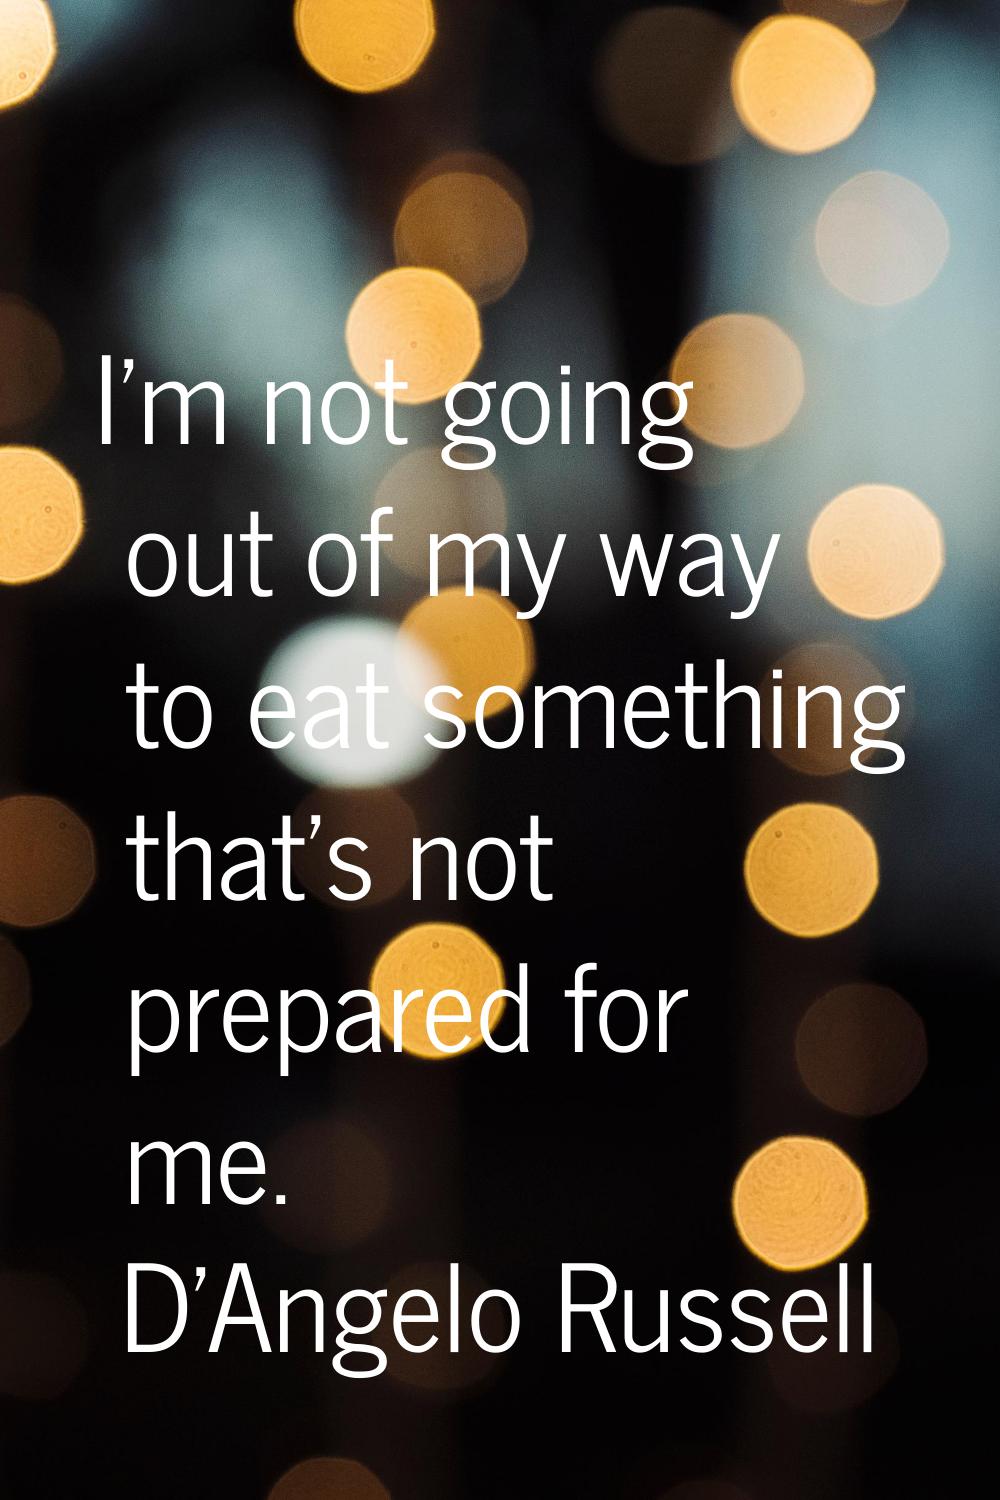 I'm not going out of my way to eat something that's not prepared for me.